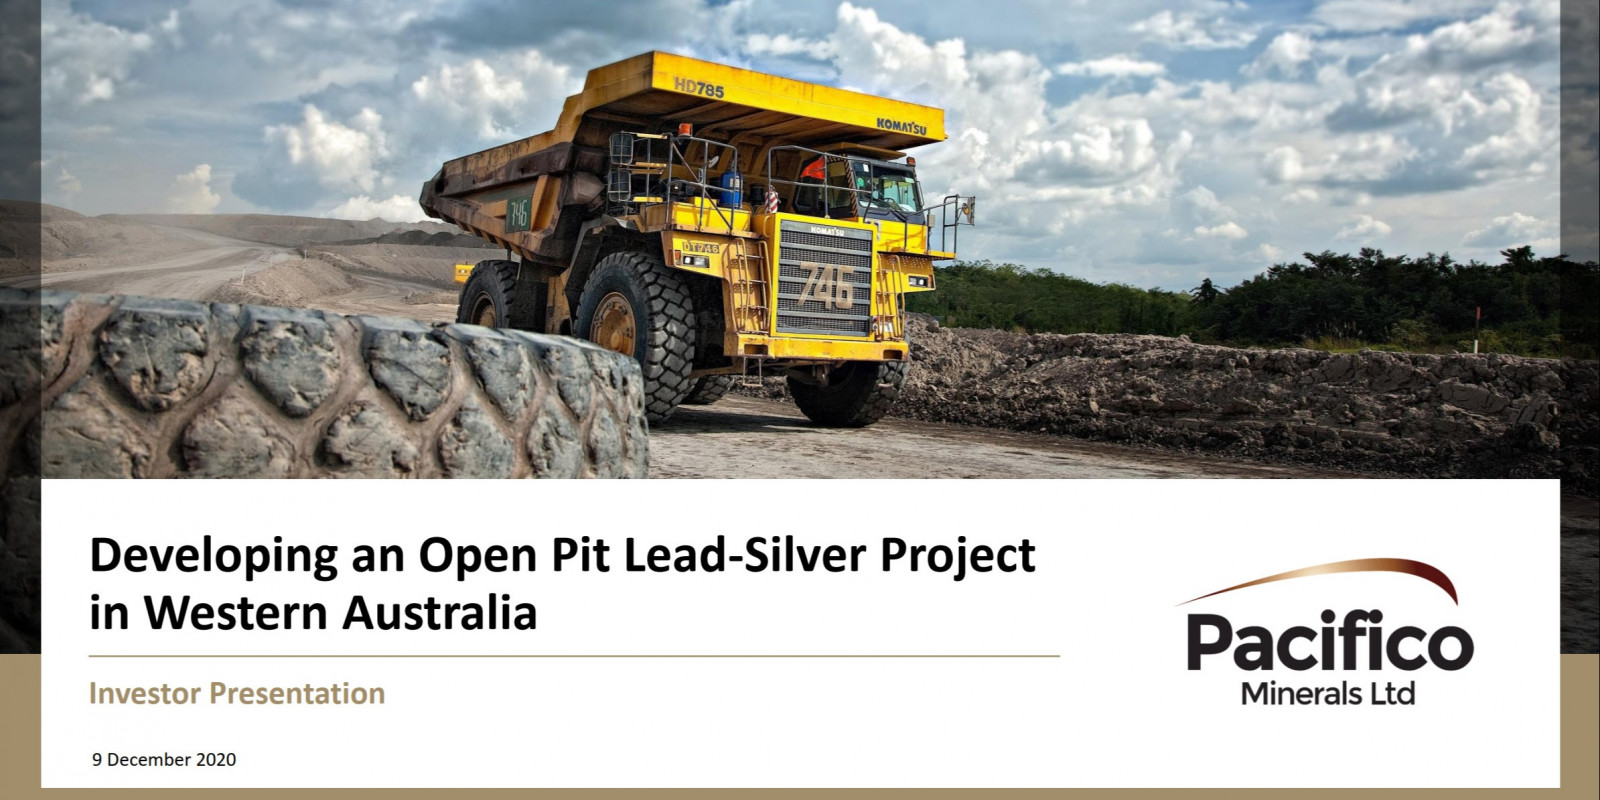 Pacifico Minerals - Developing an Open Pit Lead-Silver Project in Western Australia